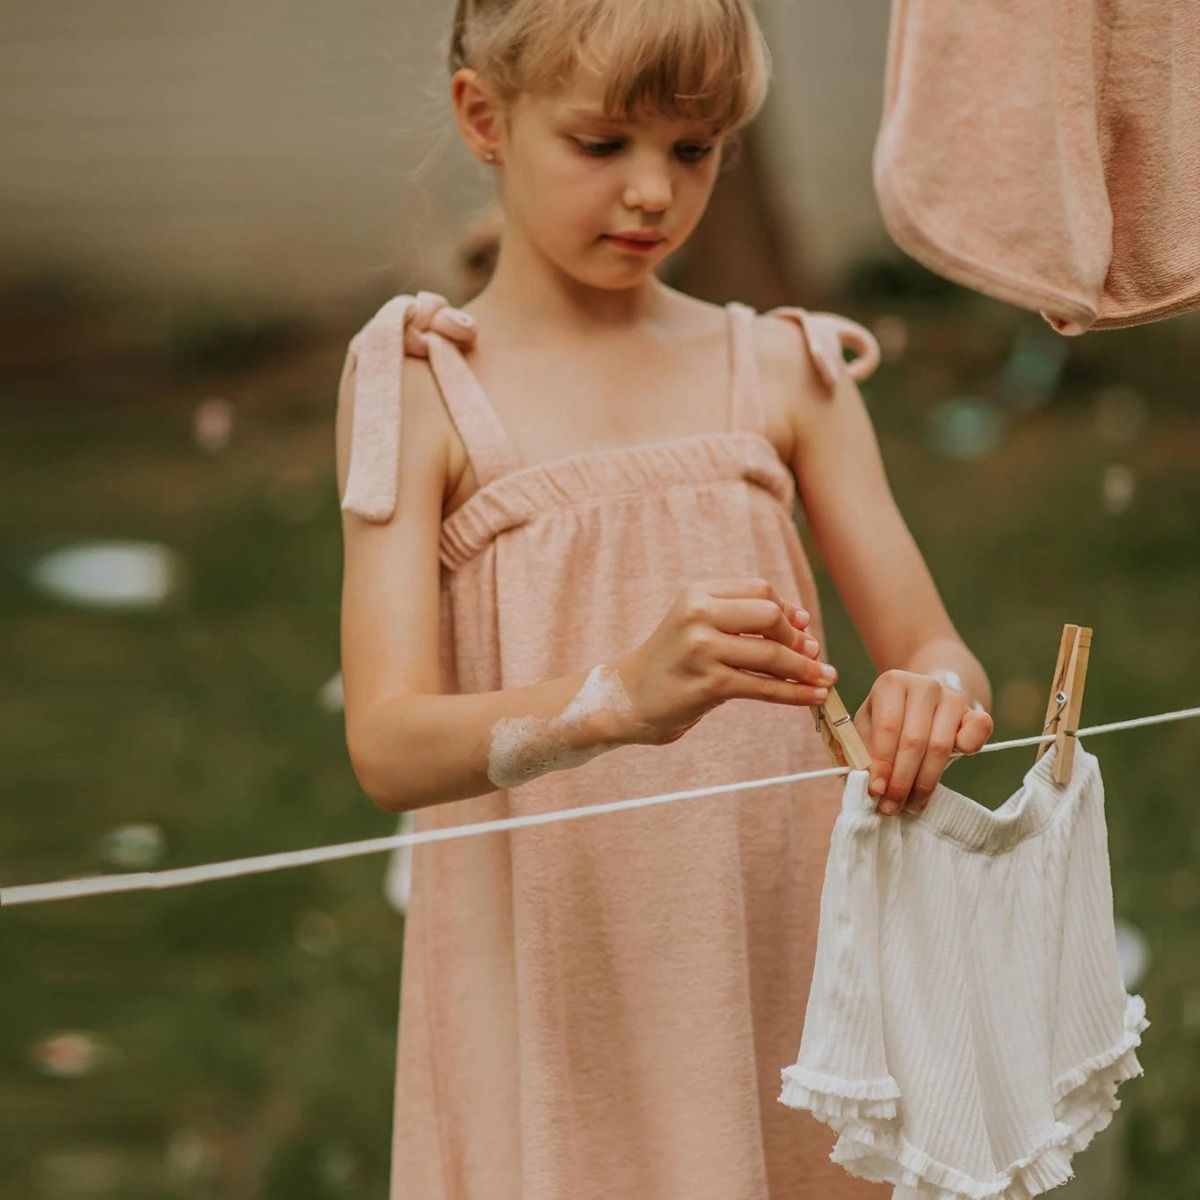 Blush Pink Terry Towel Dress with Girl outdoors